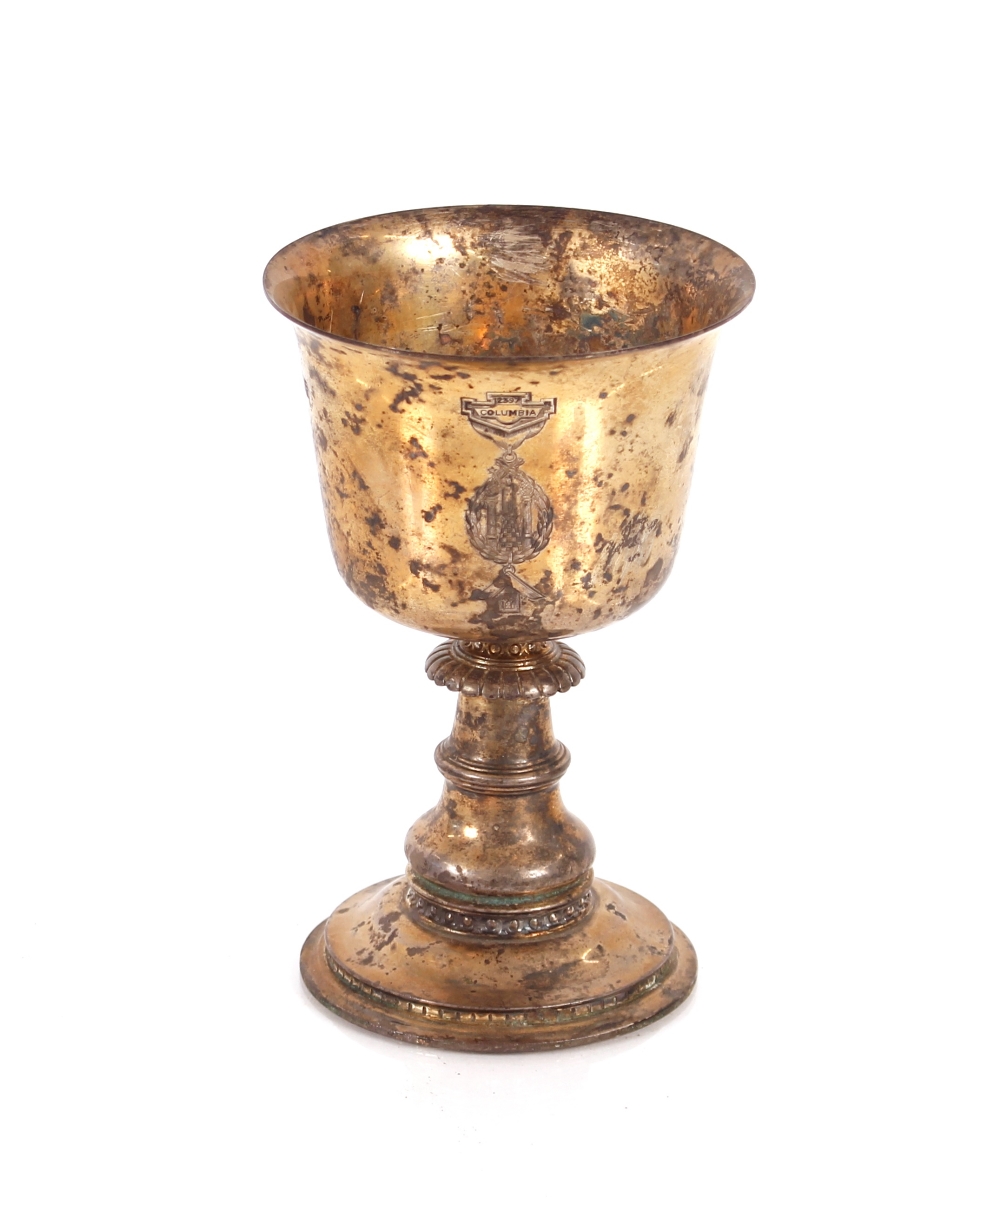 A 20th Century silver gilt Masonic chalice, with engraved decoration 2397 Columbia, 15.5cm high, 9oz